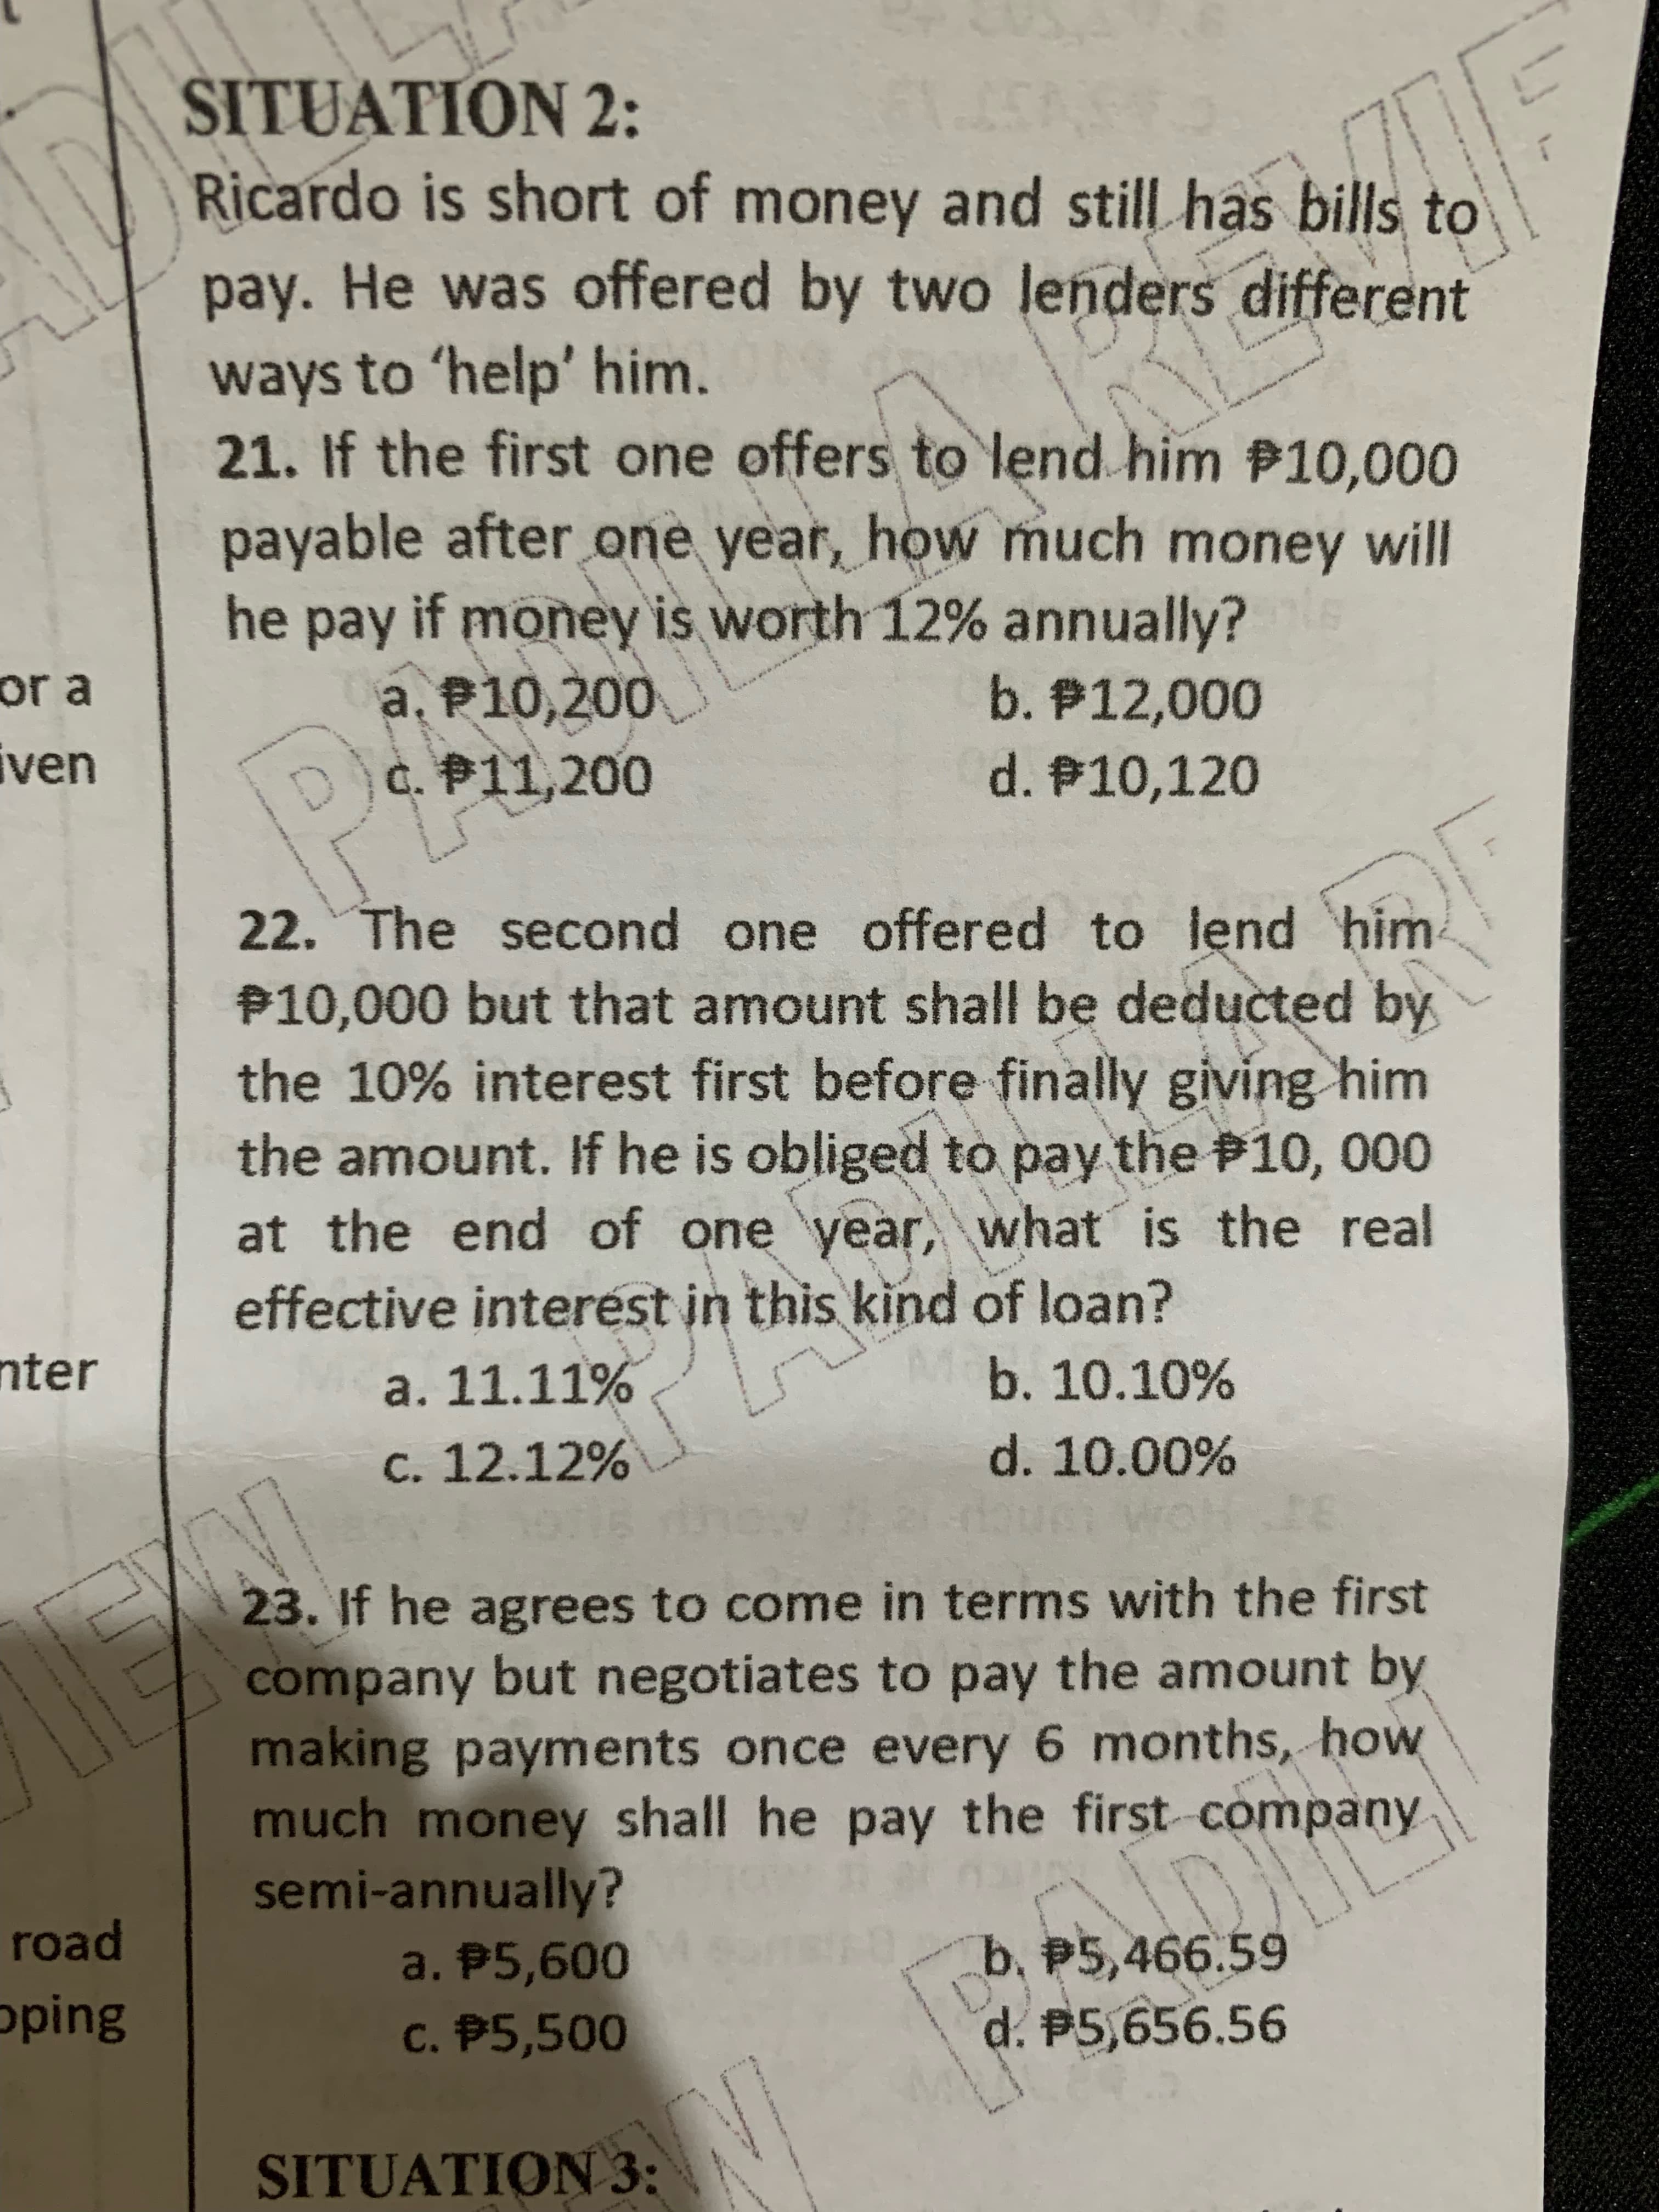 www
SITUATION 2:
Ricardo is short of money and still has bills to
pay. He was offered by two lenders different
ways to 'help' him.
21. If the first one offers to lend him P10,000
payable after one year, how much money will
he pay if money is worth 12% annually?
a, P10,200
c. P11,200
or a
b. P12,000
ven
d. P10,120
22. The second one offered to lend him
P10,000 but that amount shall be deducted by
the 10% interest first before finally giving him
the amount. If he is obliged to pay the 10, 000
at the end of one year, what is the real
effective interést in this kind of loan?
nter
a. 11.11%
b. 10.10%
C. 12.12%
d. 10.00%
23. If he agrees to come in terms with the first
company but negotiates to pay the amount by
making payments once every 6 months, how
much money shall he pay the first company
semi-annually?
a. P5,600
C. P5,500
road
b, P5,466.59
oping
d. P5,656.56
SITUATION 3:
344
